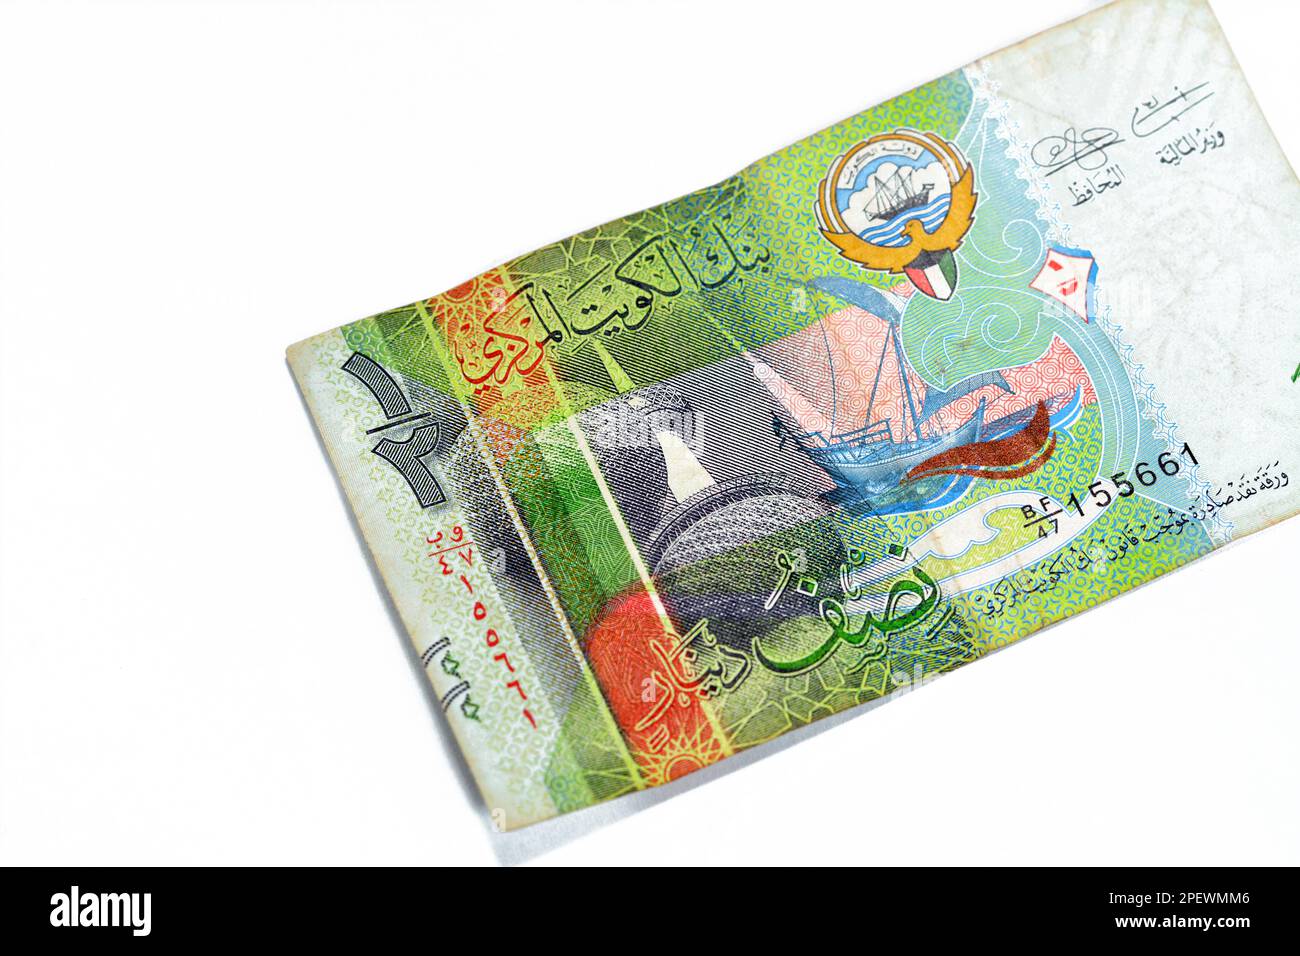 obverse side of Kuwaiti half dinar green paper banknote cash money bill currency features Kuwait Towers and a dhow ship issue 2014 with coat of arms a Stock Photo